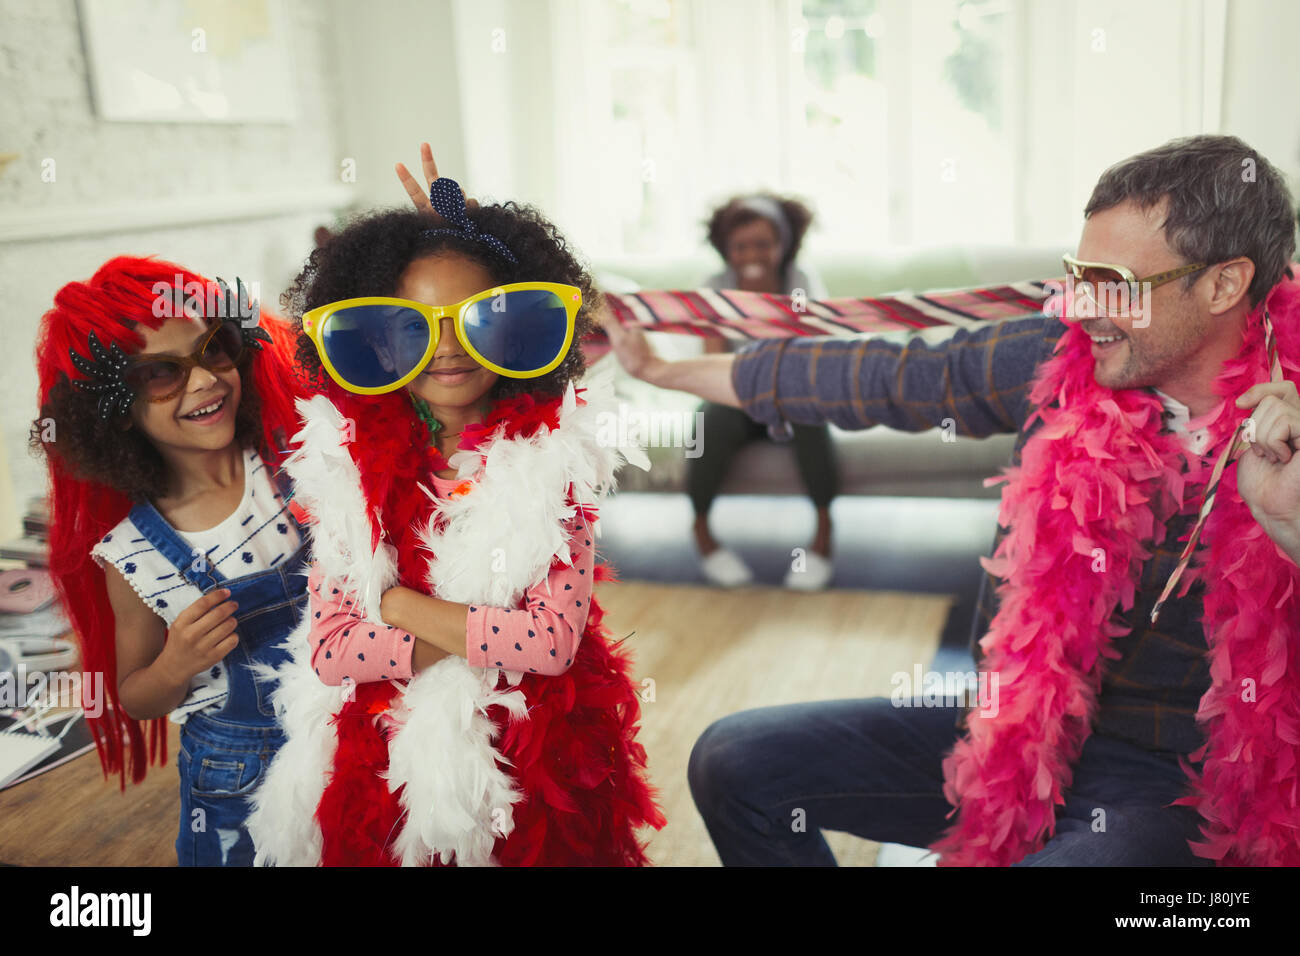  Feather Boas For Kids